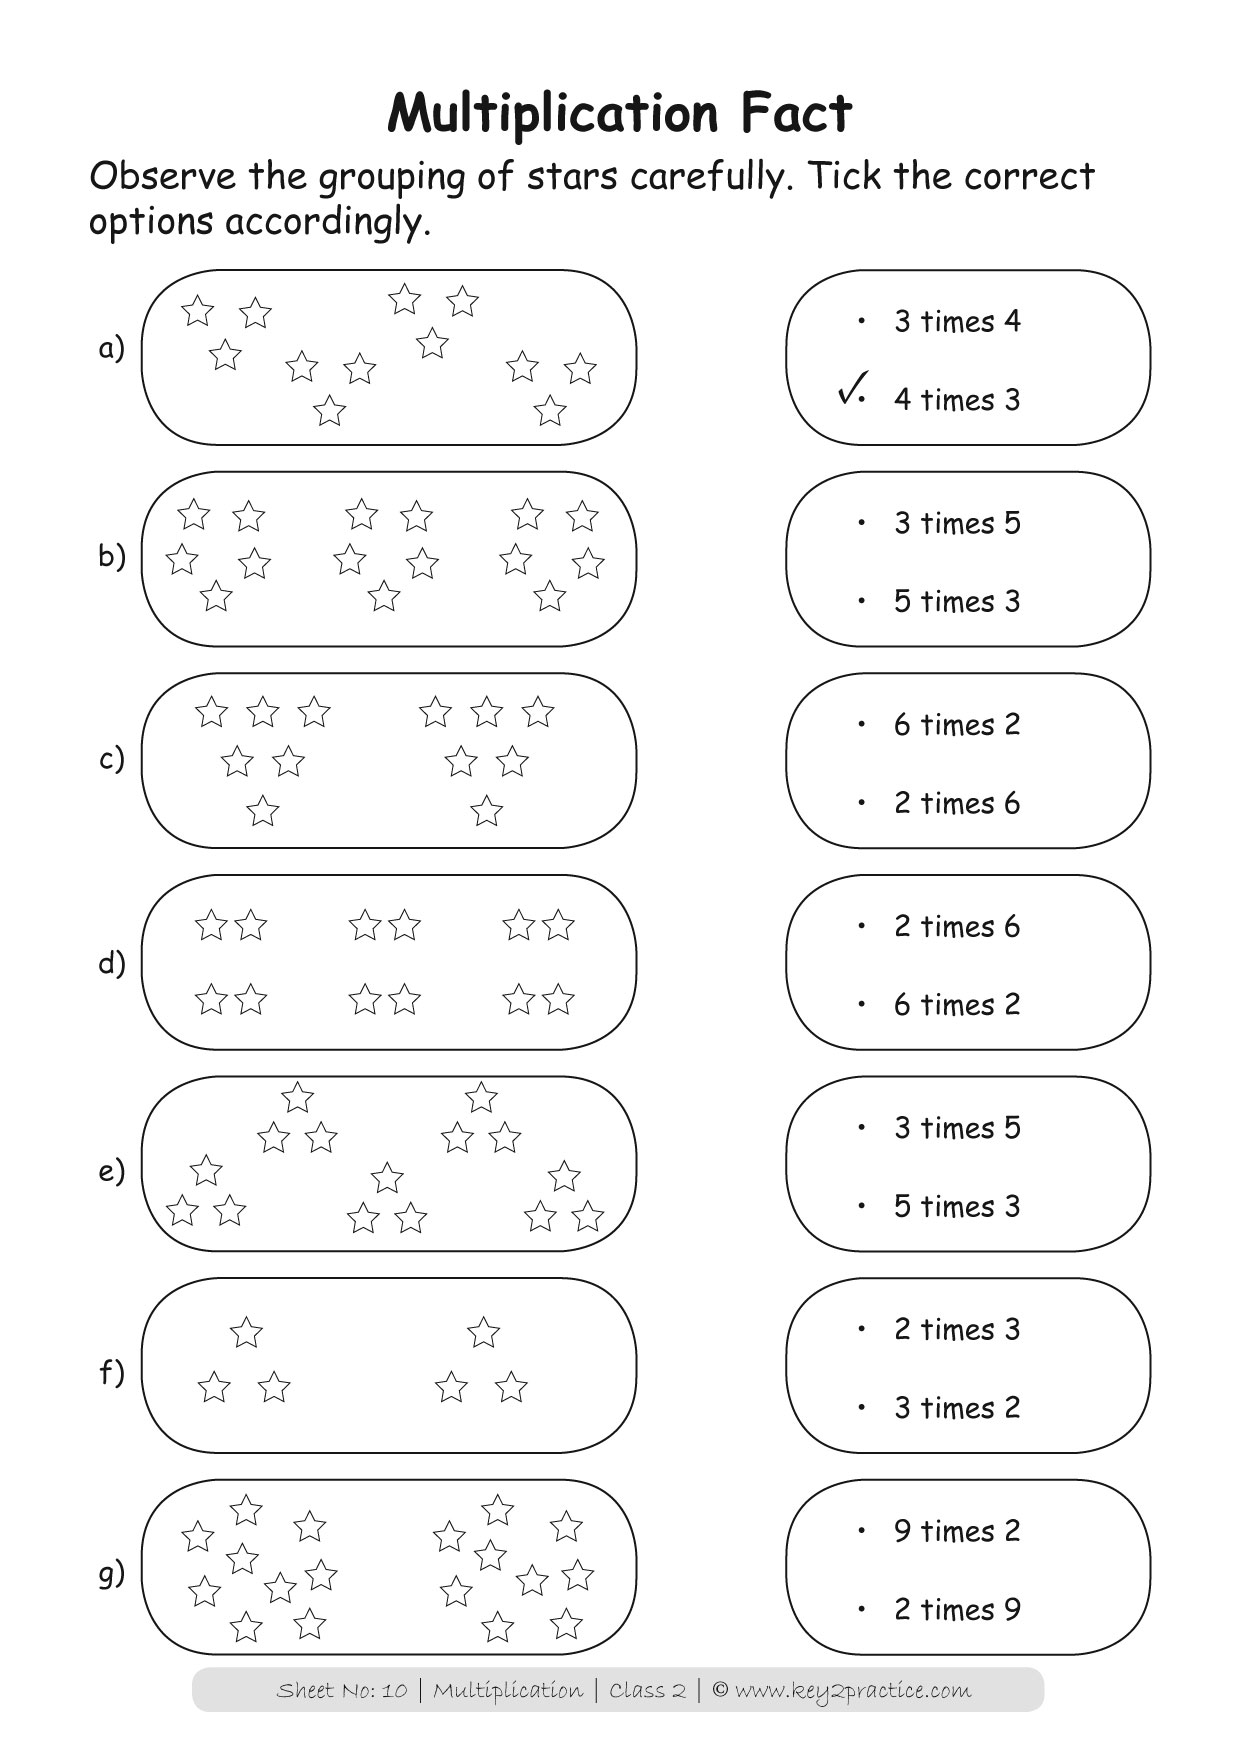 Multiplication Sums For Class 2 Worksheets Pdf